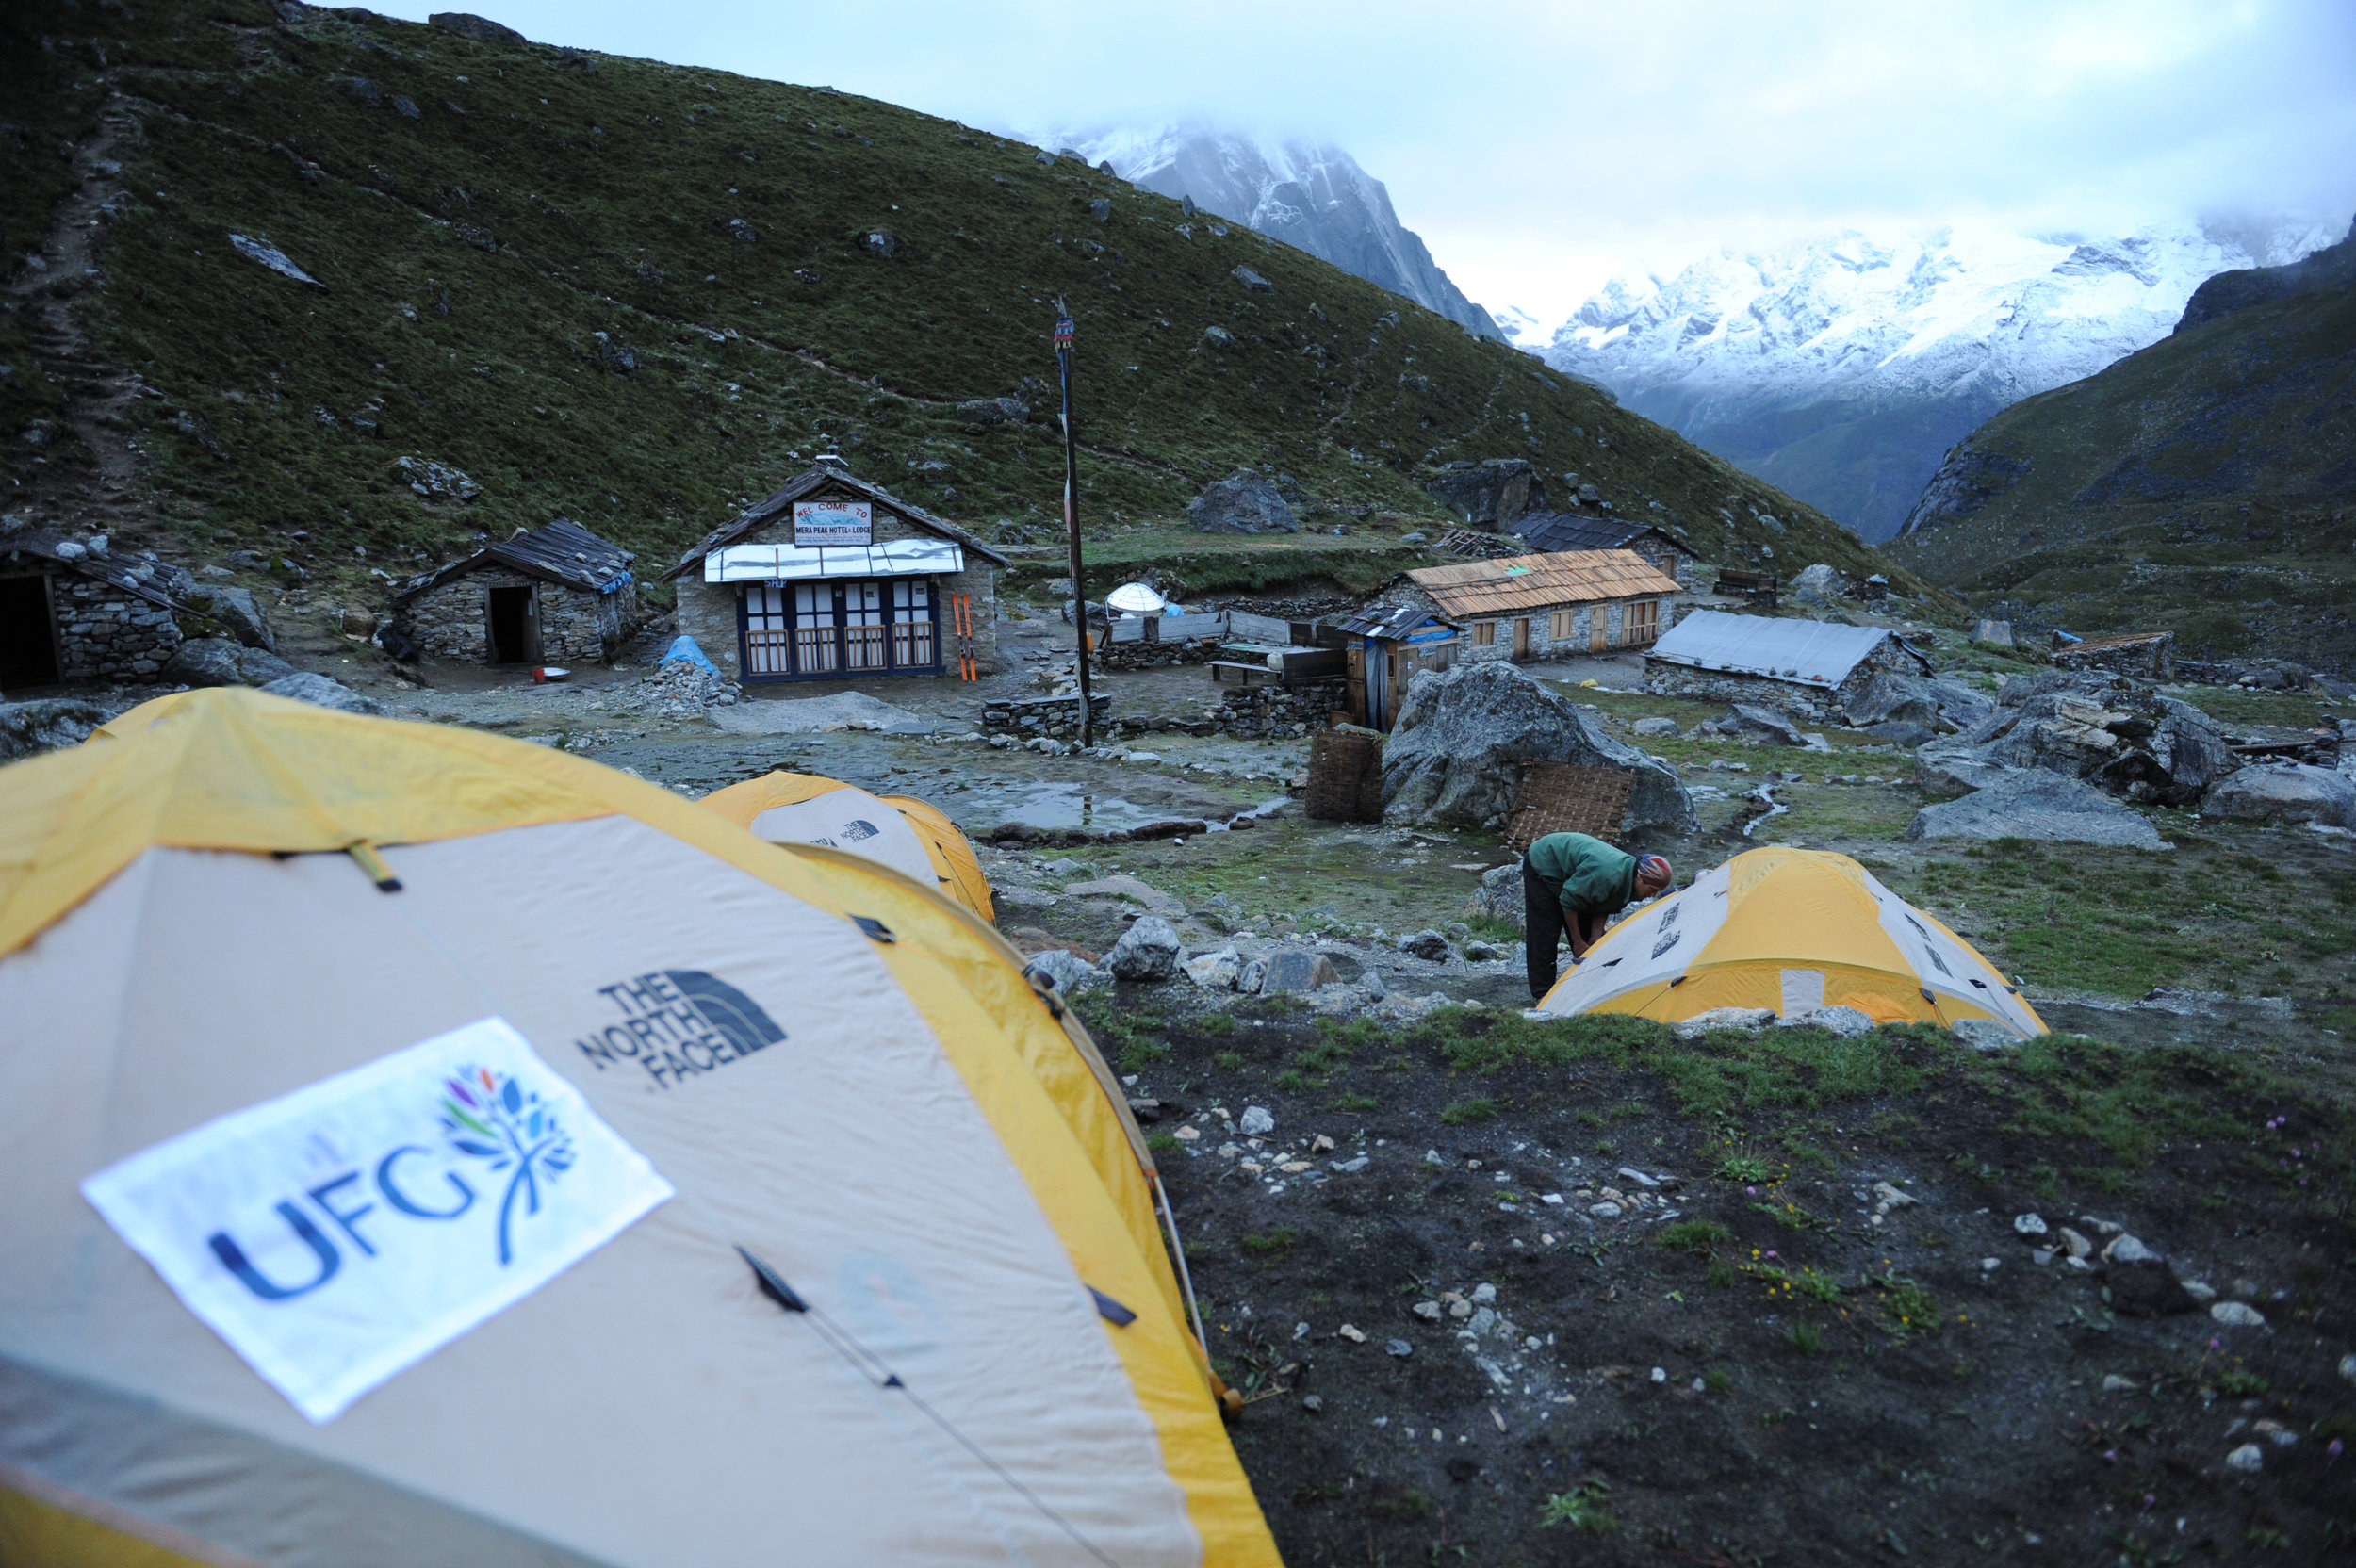 Typical camp at lower altitudes.